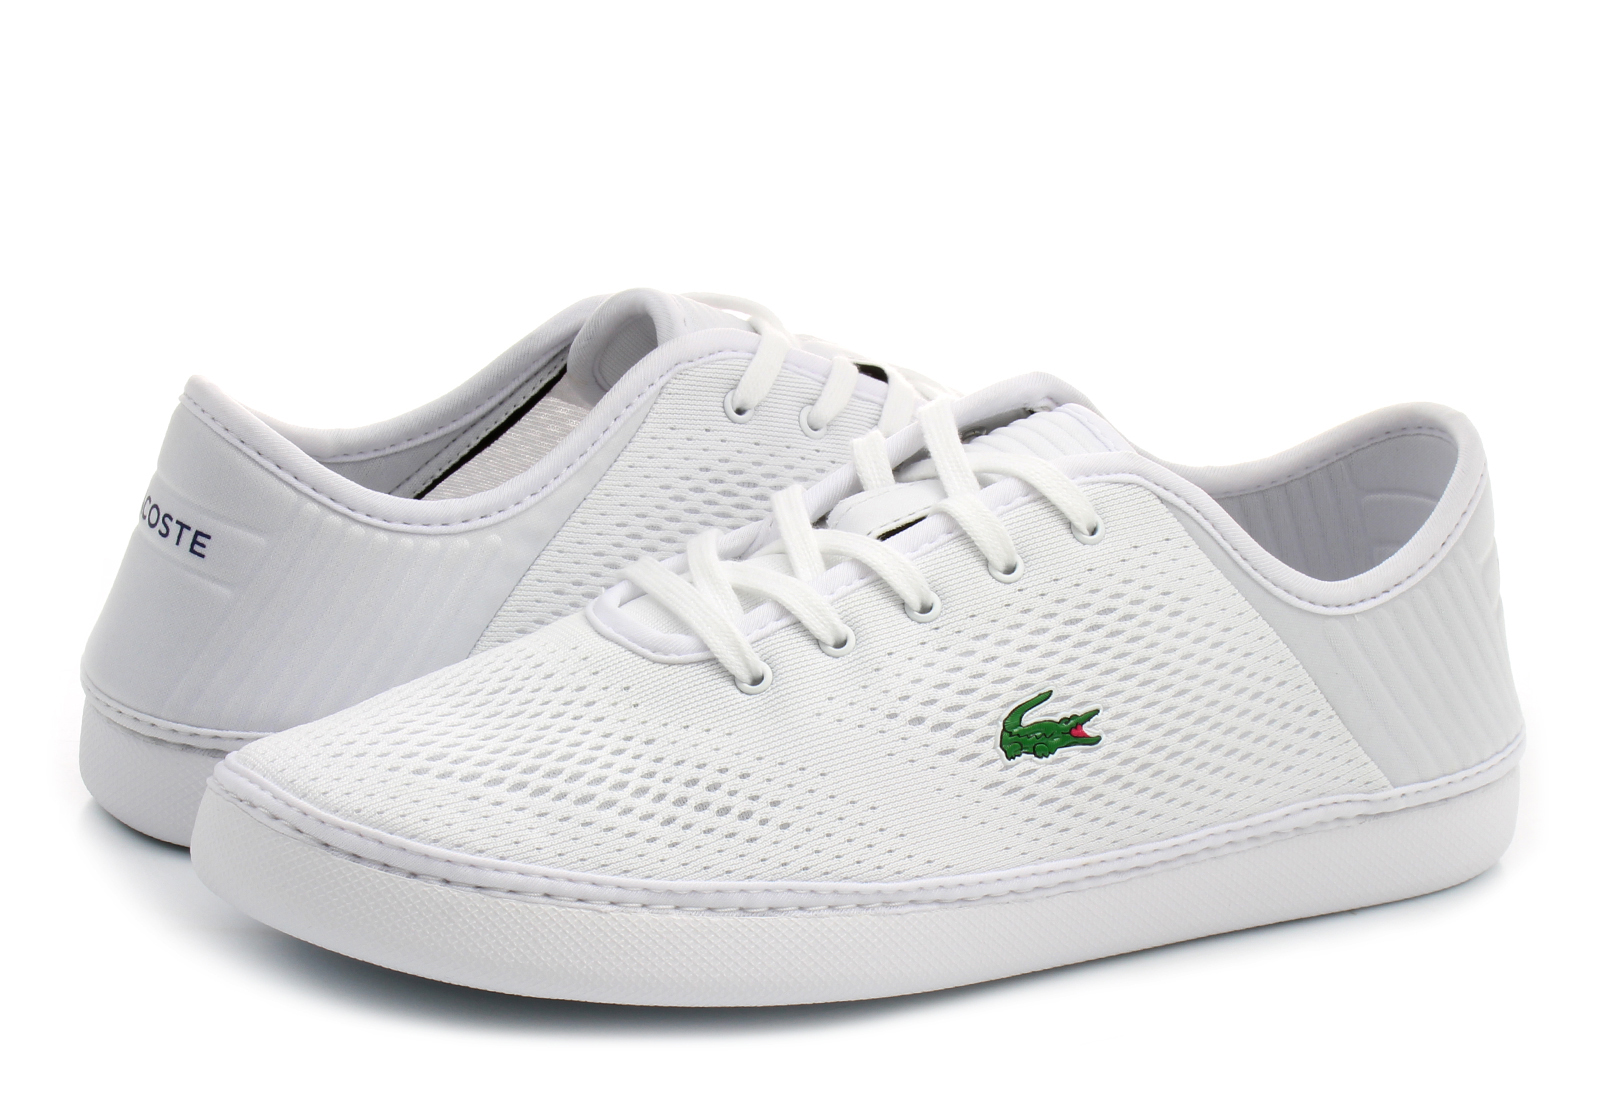 lacoste lydro lace